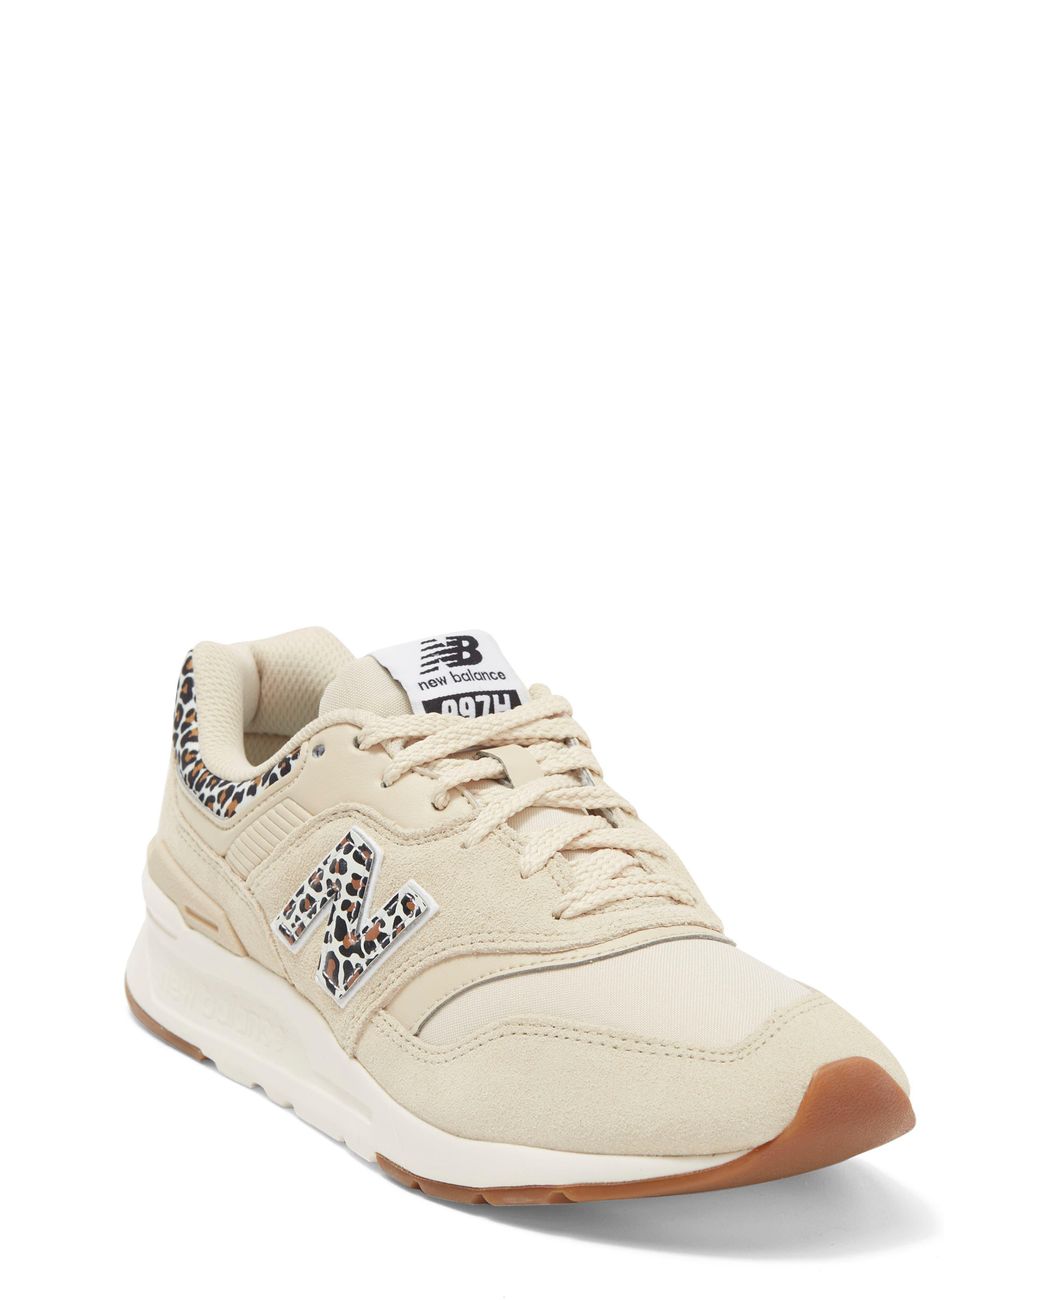 Geografía fax Mexico New Balance 977 H Sneaker In Sandstone At Nordstrom Rack in White | Lyst